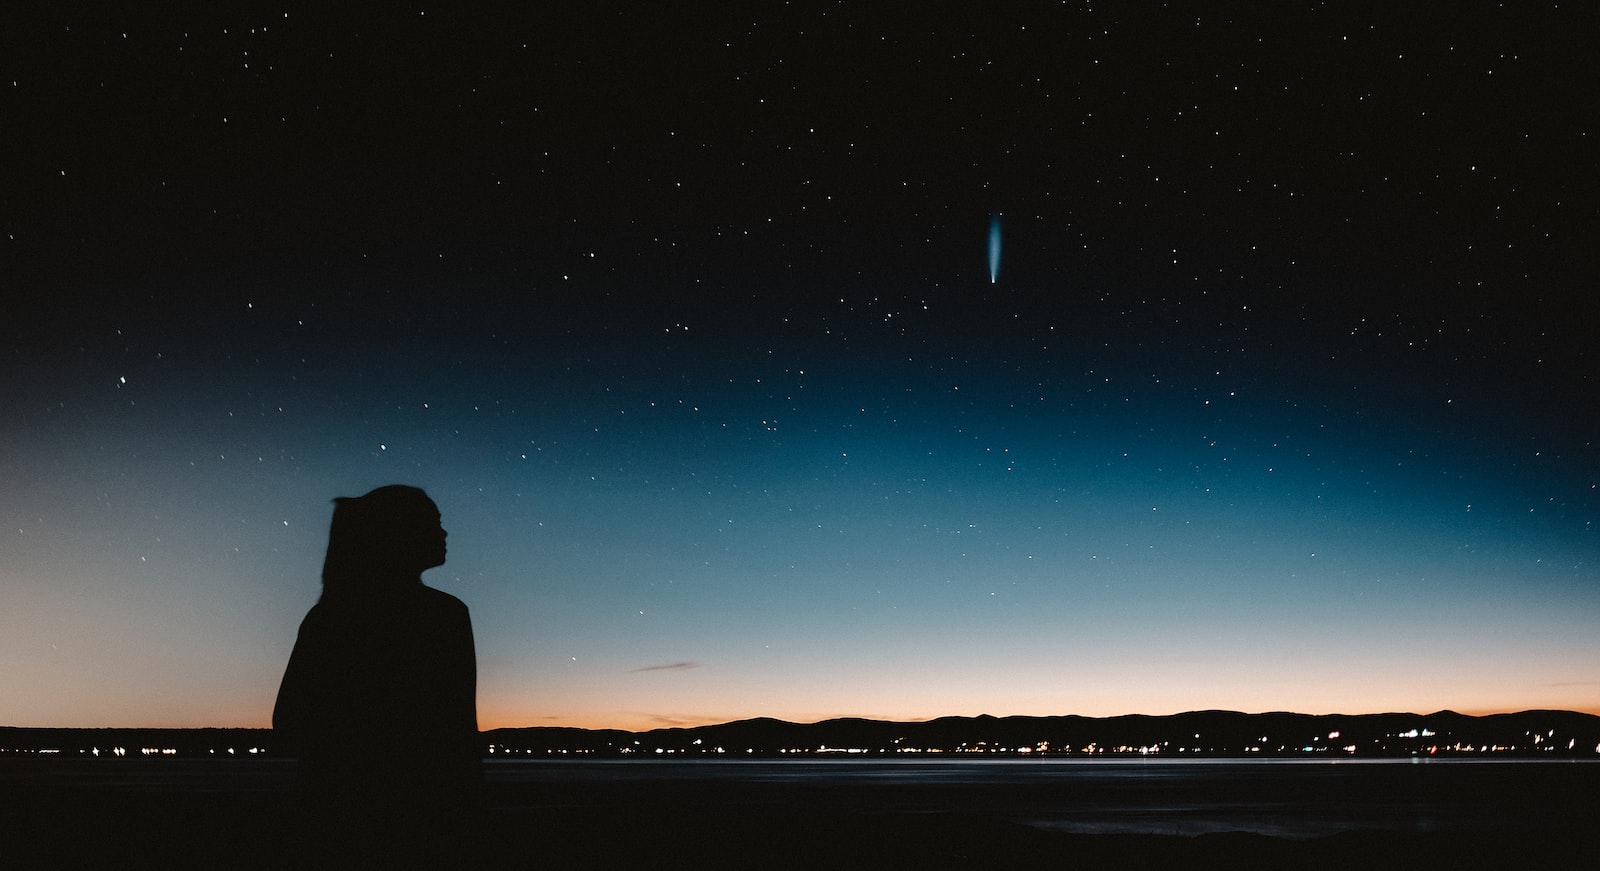 silhouette of man standing near body of water during night time